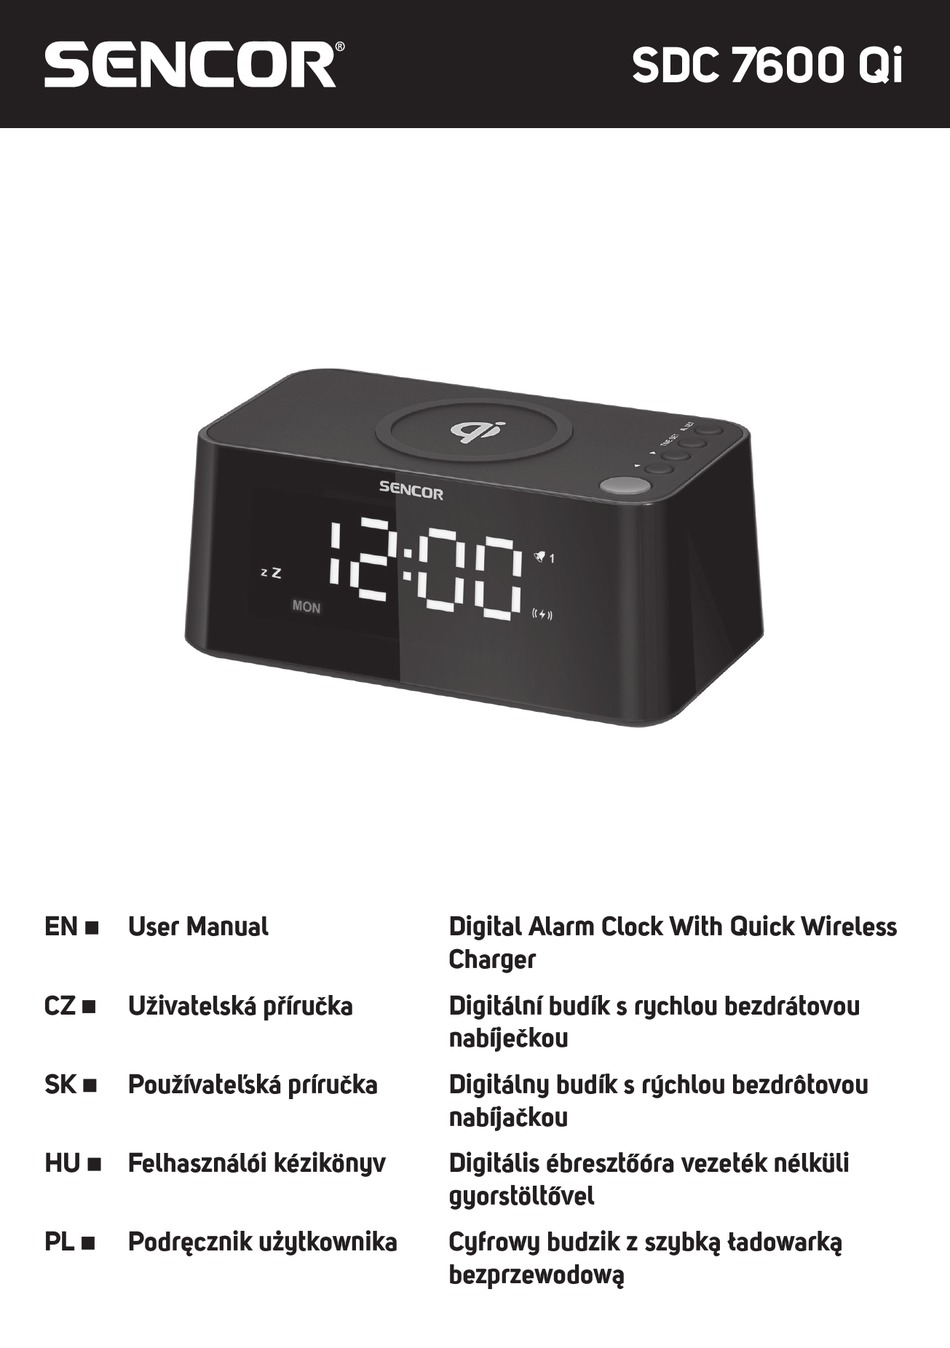 Digital Alarm Clock with Thermometer, SDC 2200